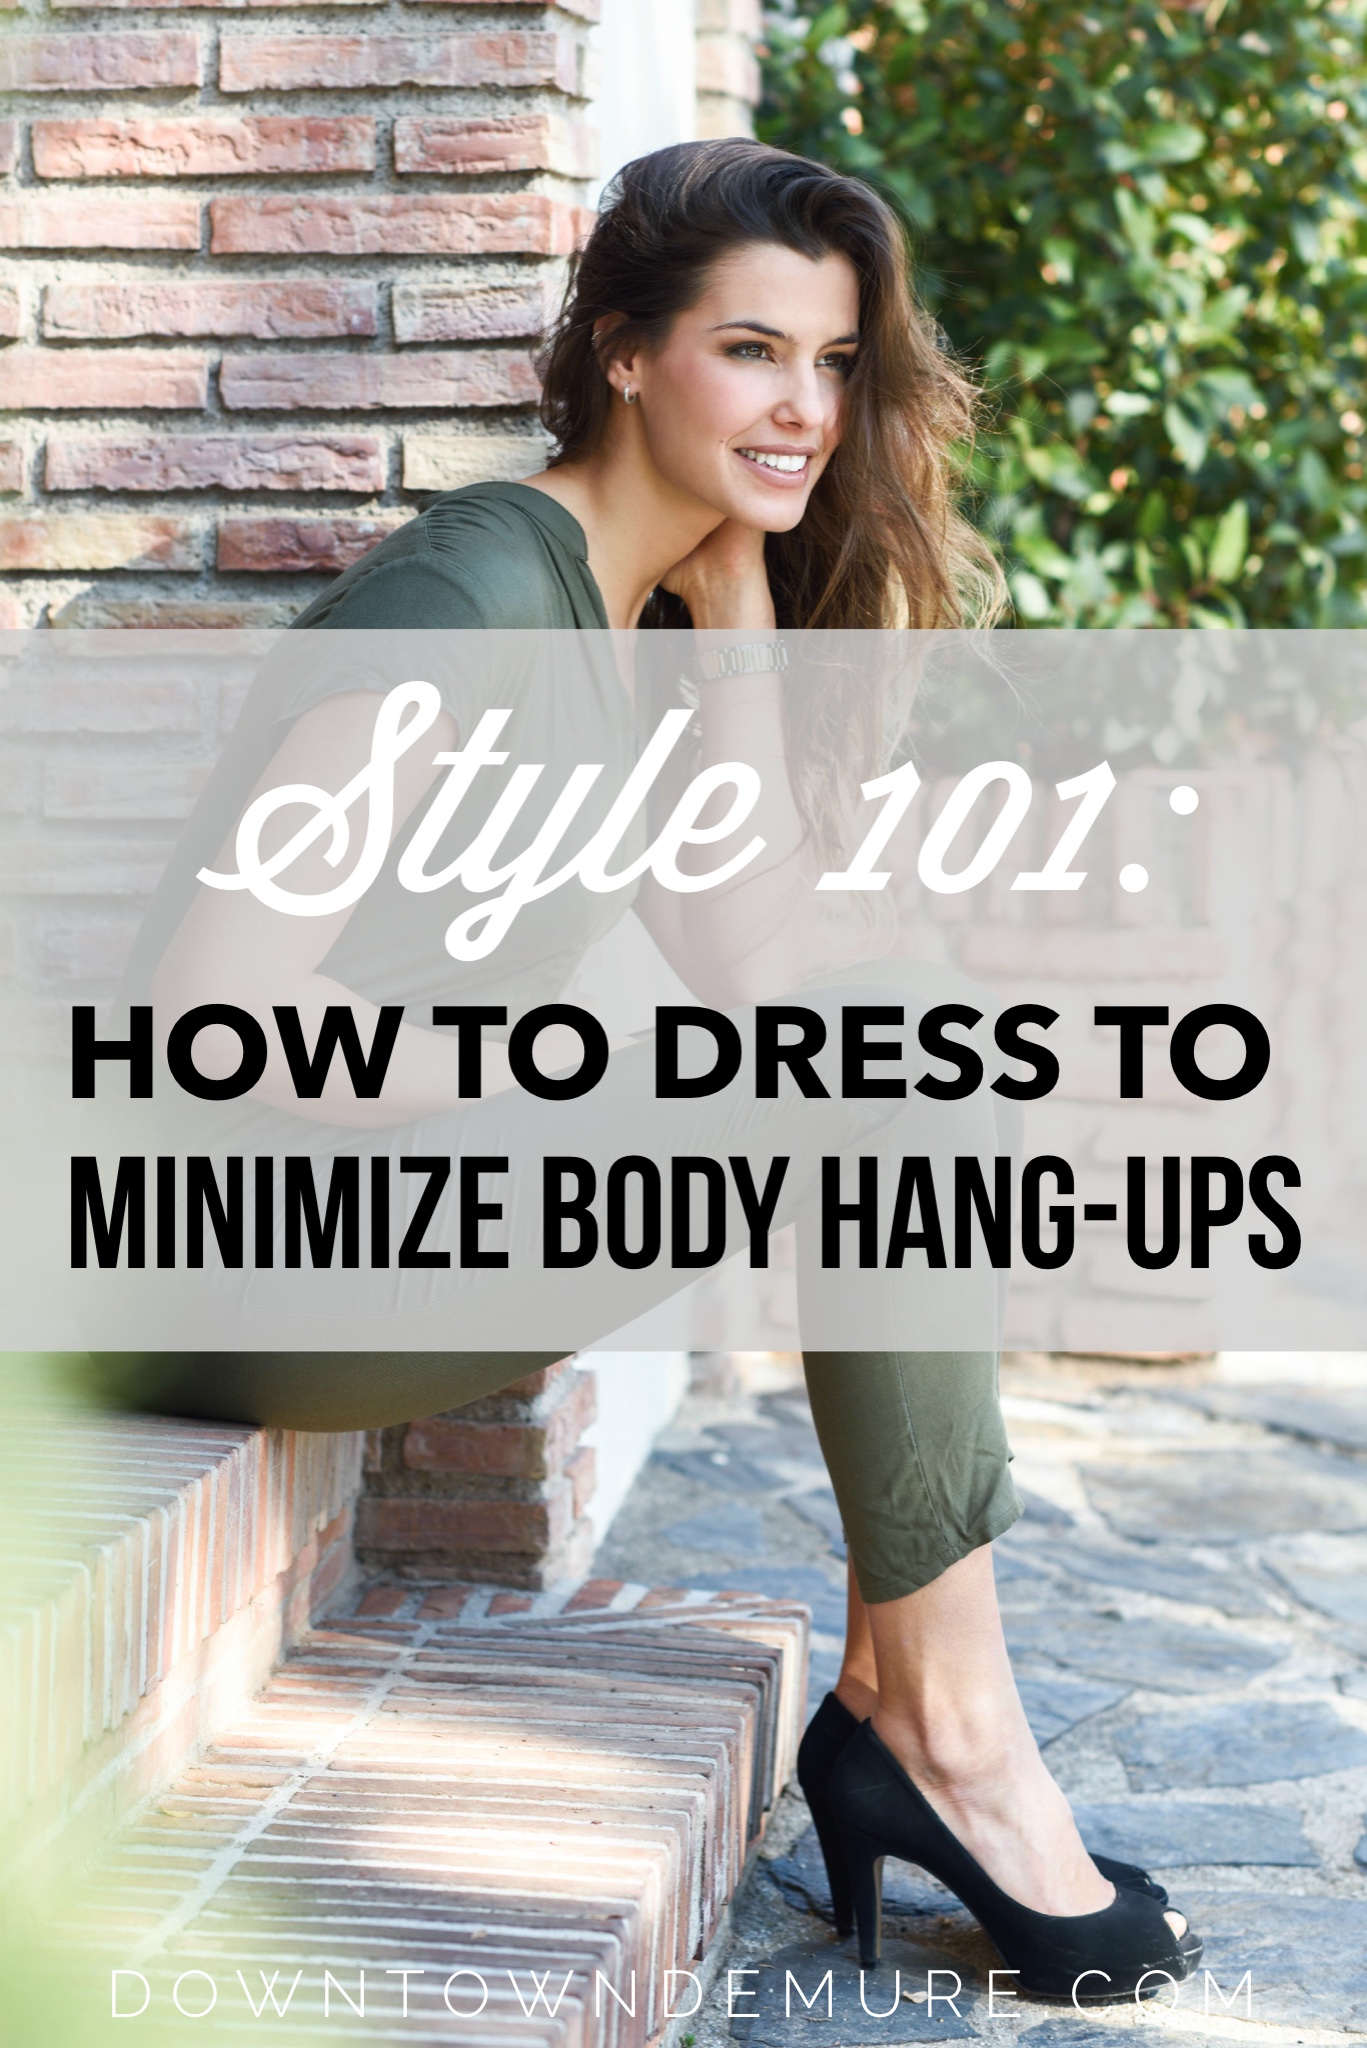 How To Dress to Minimize Pesky Body Issues